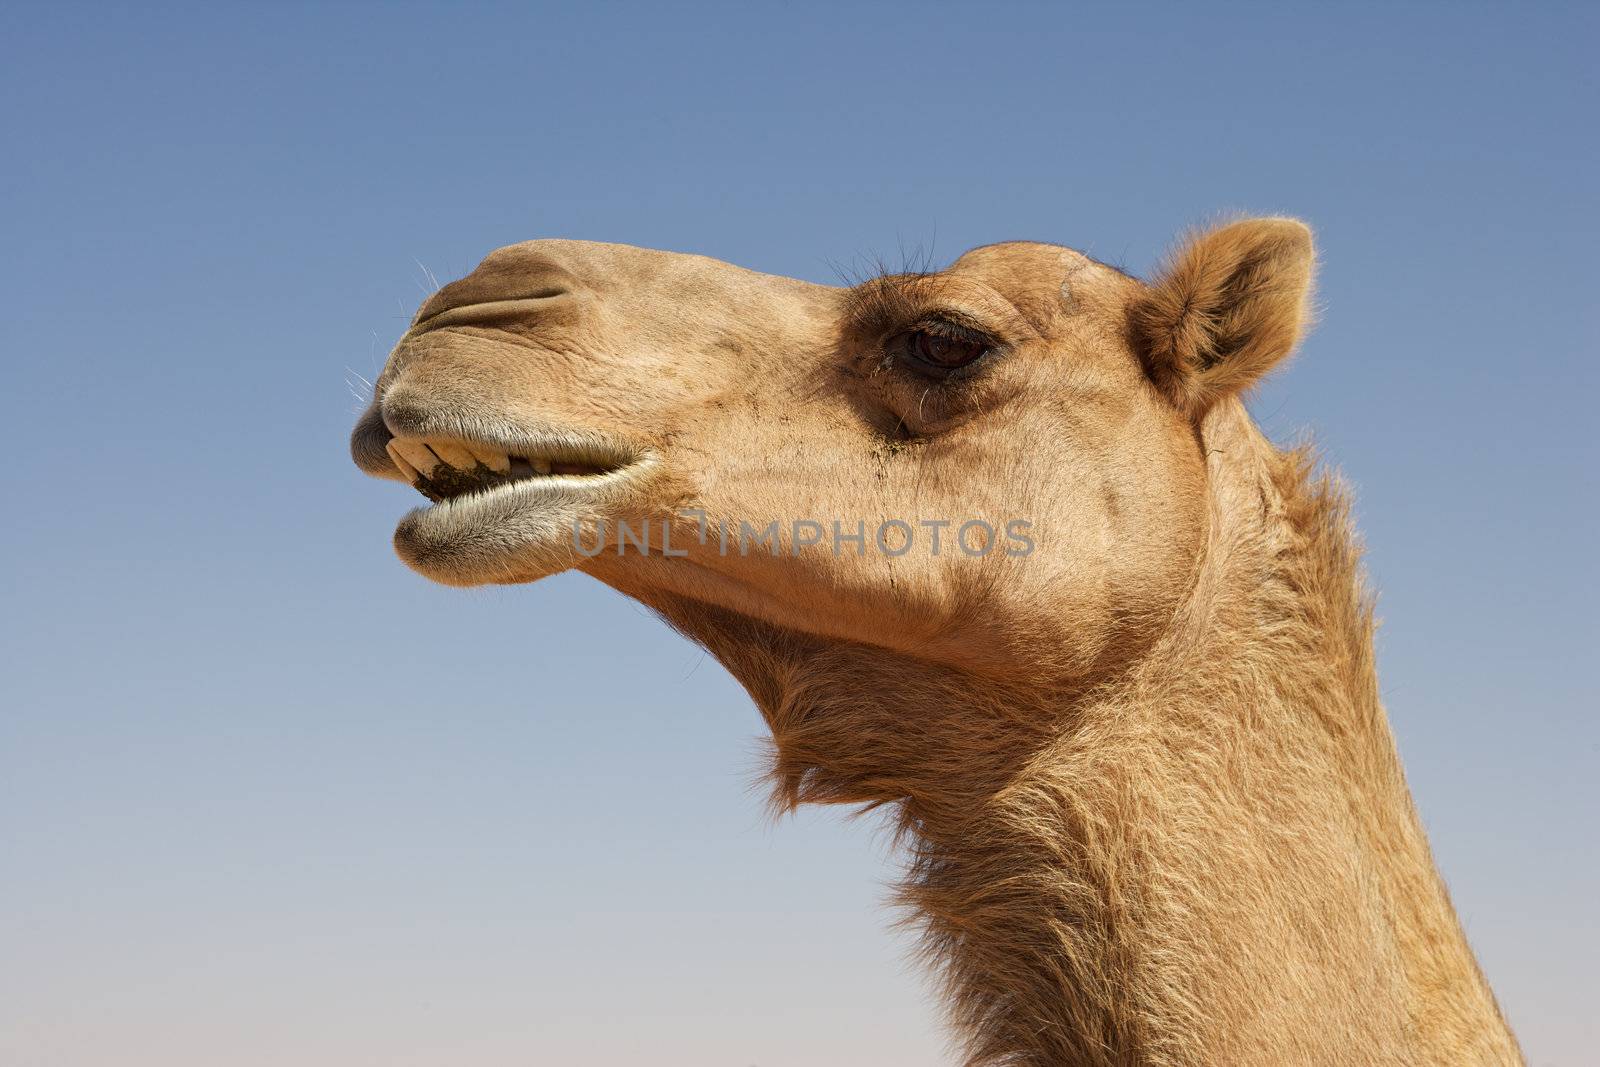 Portrait of a camel in the Rub al Khali or Empty Quarter. Straddling Oman, Saudi Arabia, the UAE and Yemen, this is the largest sand desert in the world.